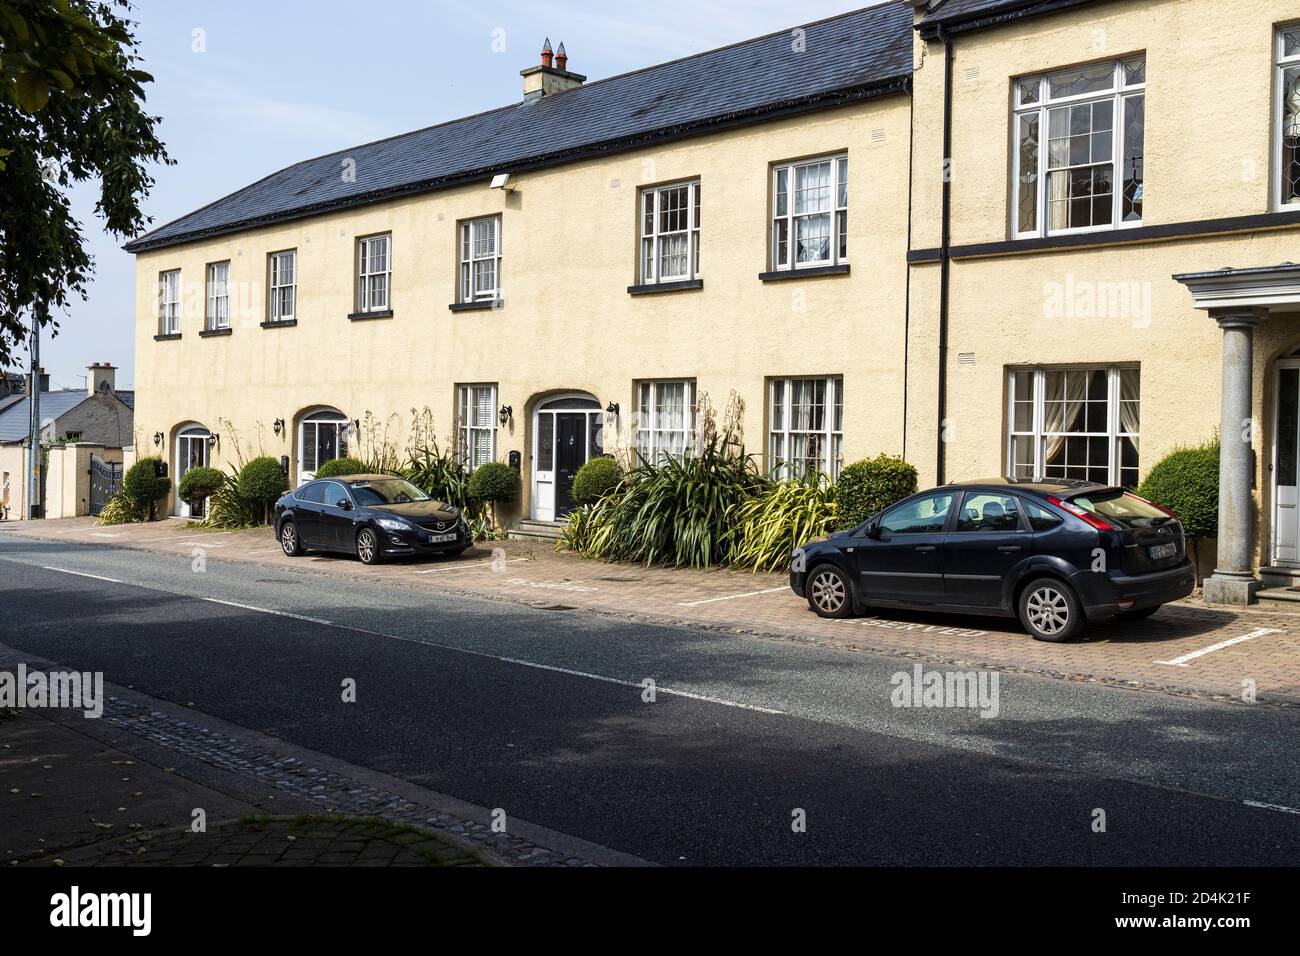 Coach house converted to housing, grade 2 listed building, in Johnstown, County Kildare, Ireland Stock Photo